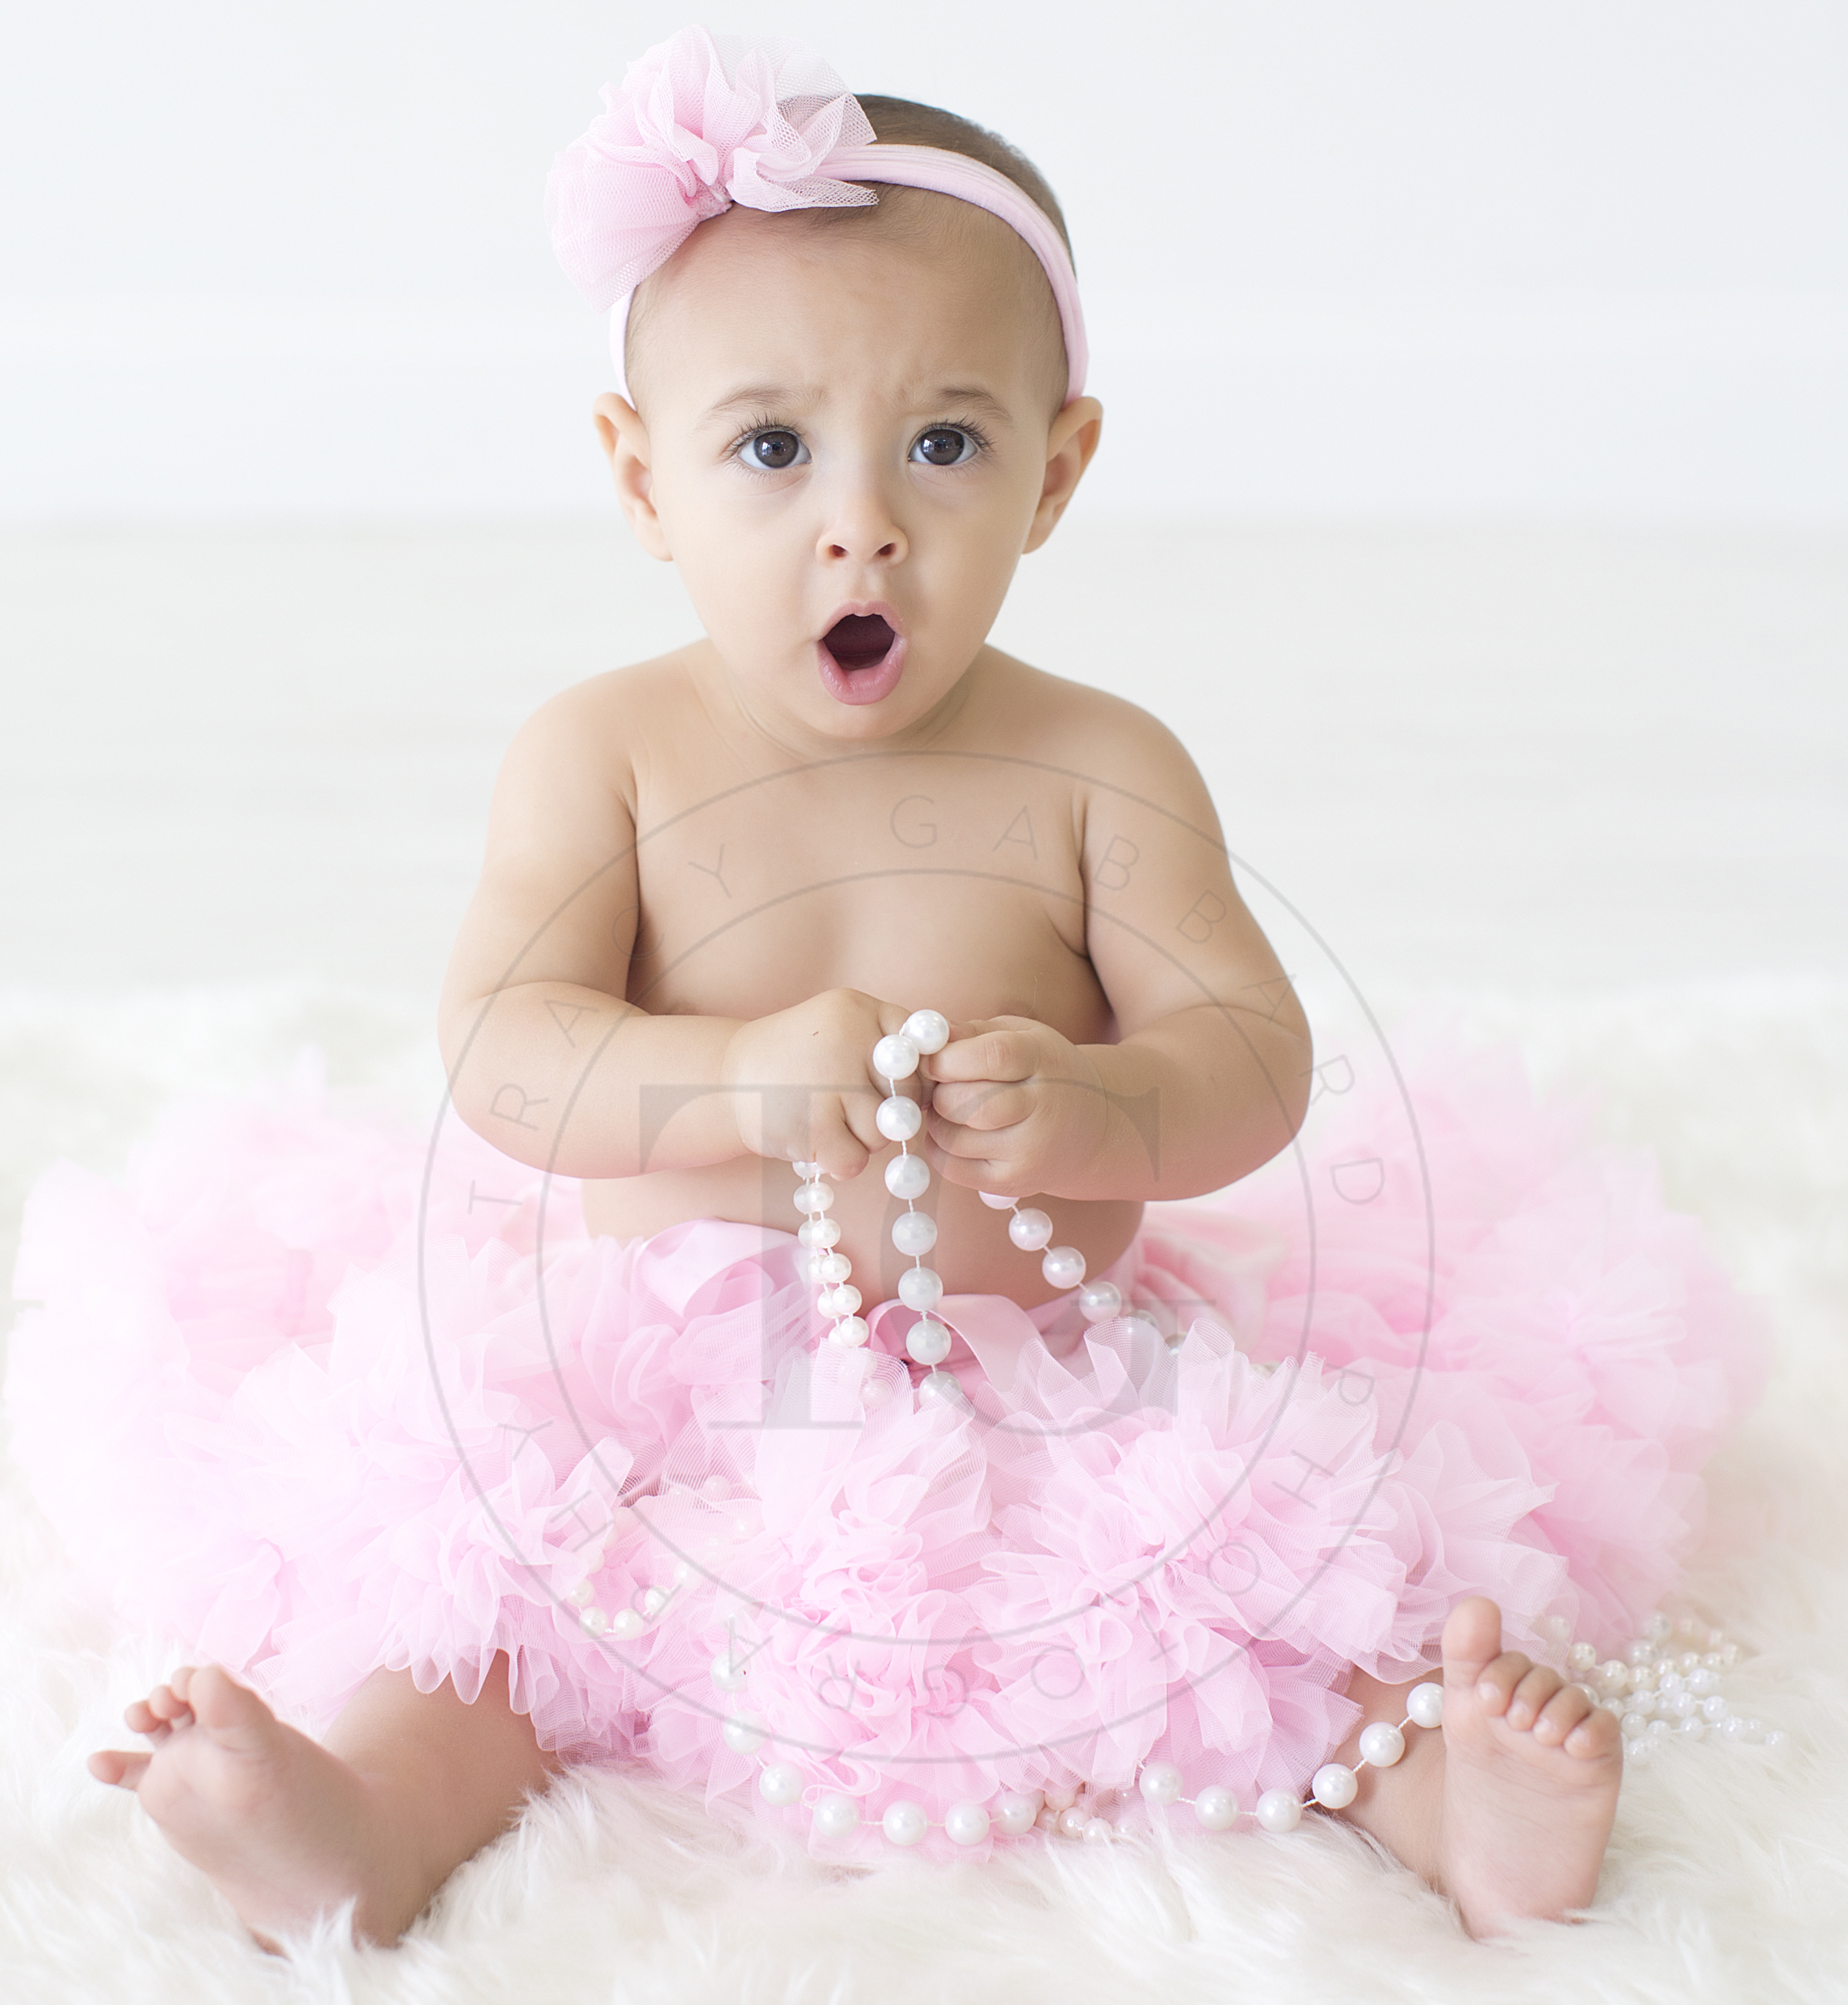 Child Photography Pretty in Pink